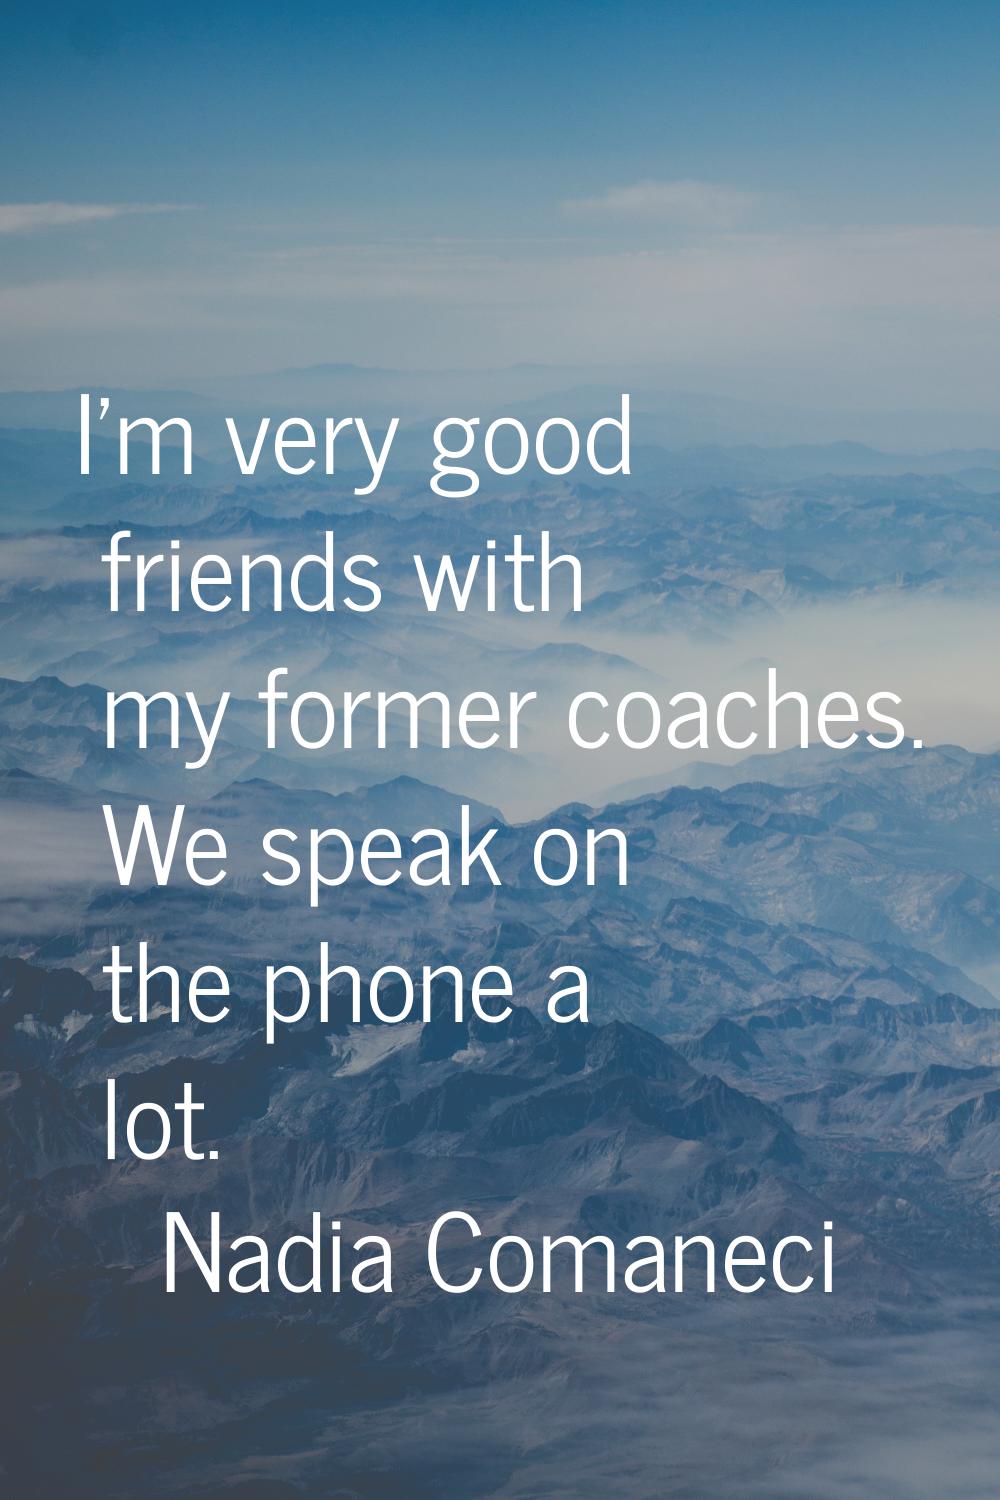 I'm very good friends with my former coaches. We speak on the phone a lot.